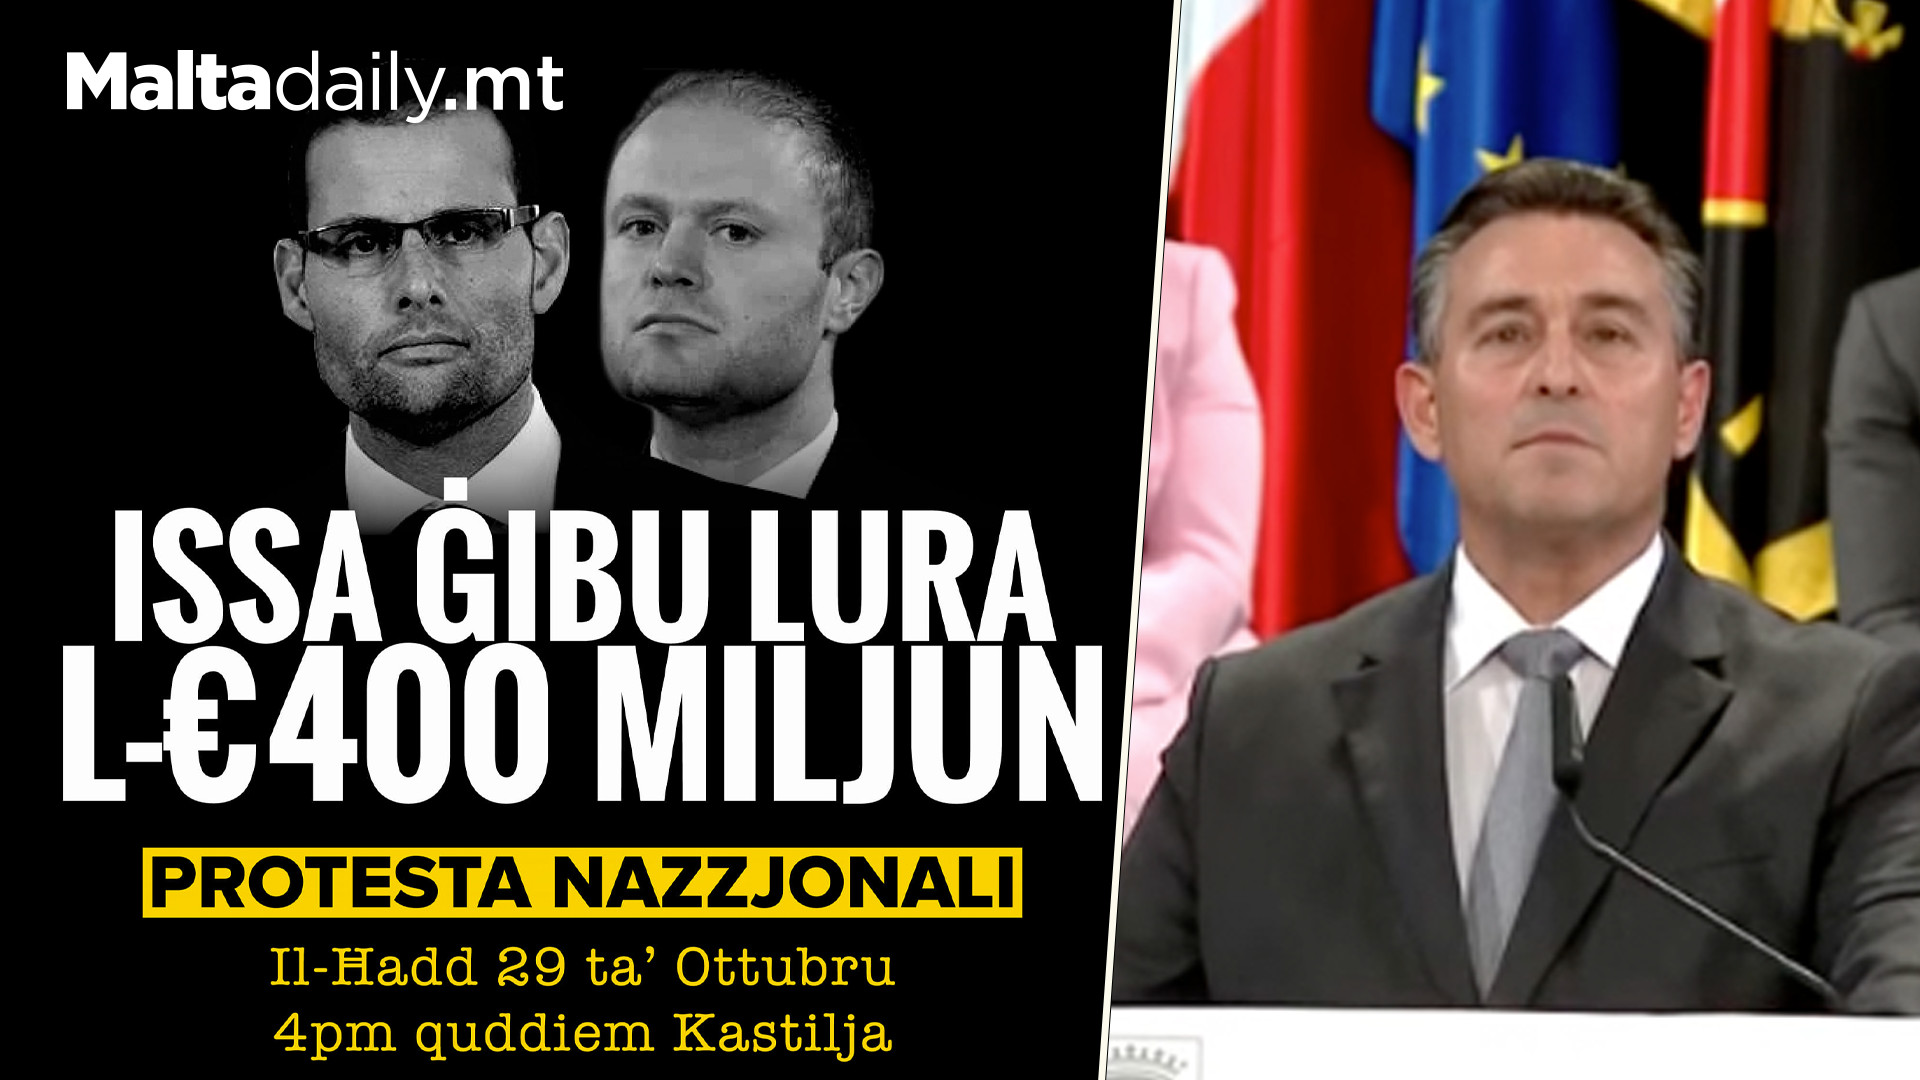 PN Calls For Protest Next Sunday After Court Ruling